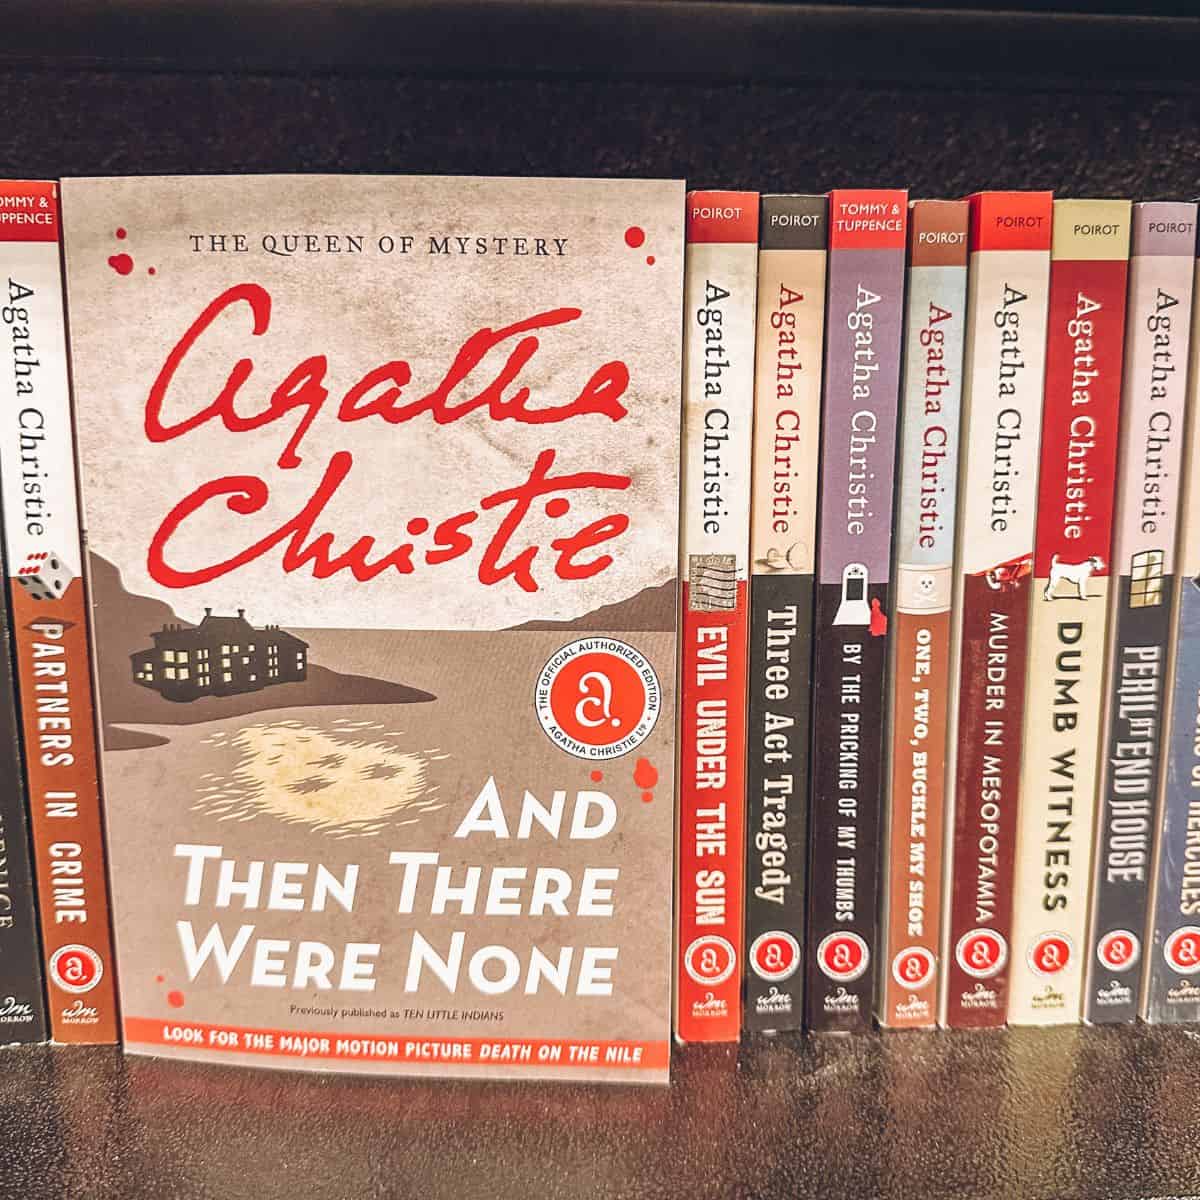 And then there were none by Agatha Christie and other Agatha Christie books on a bookshelf.